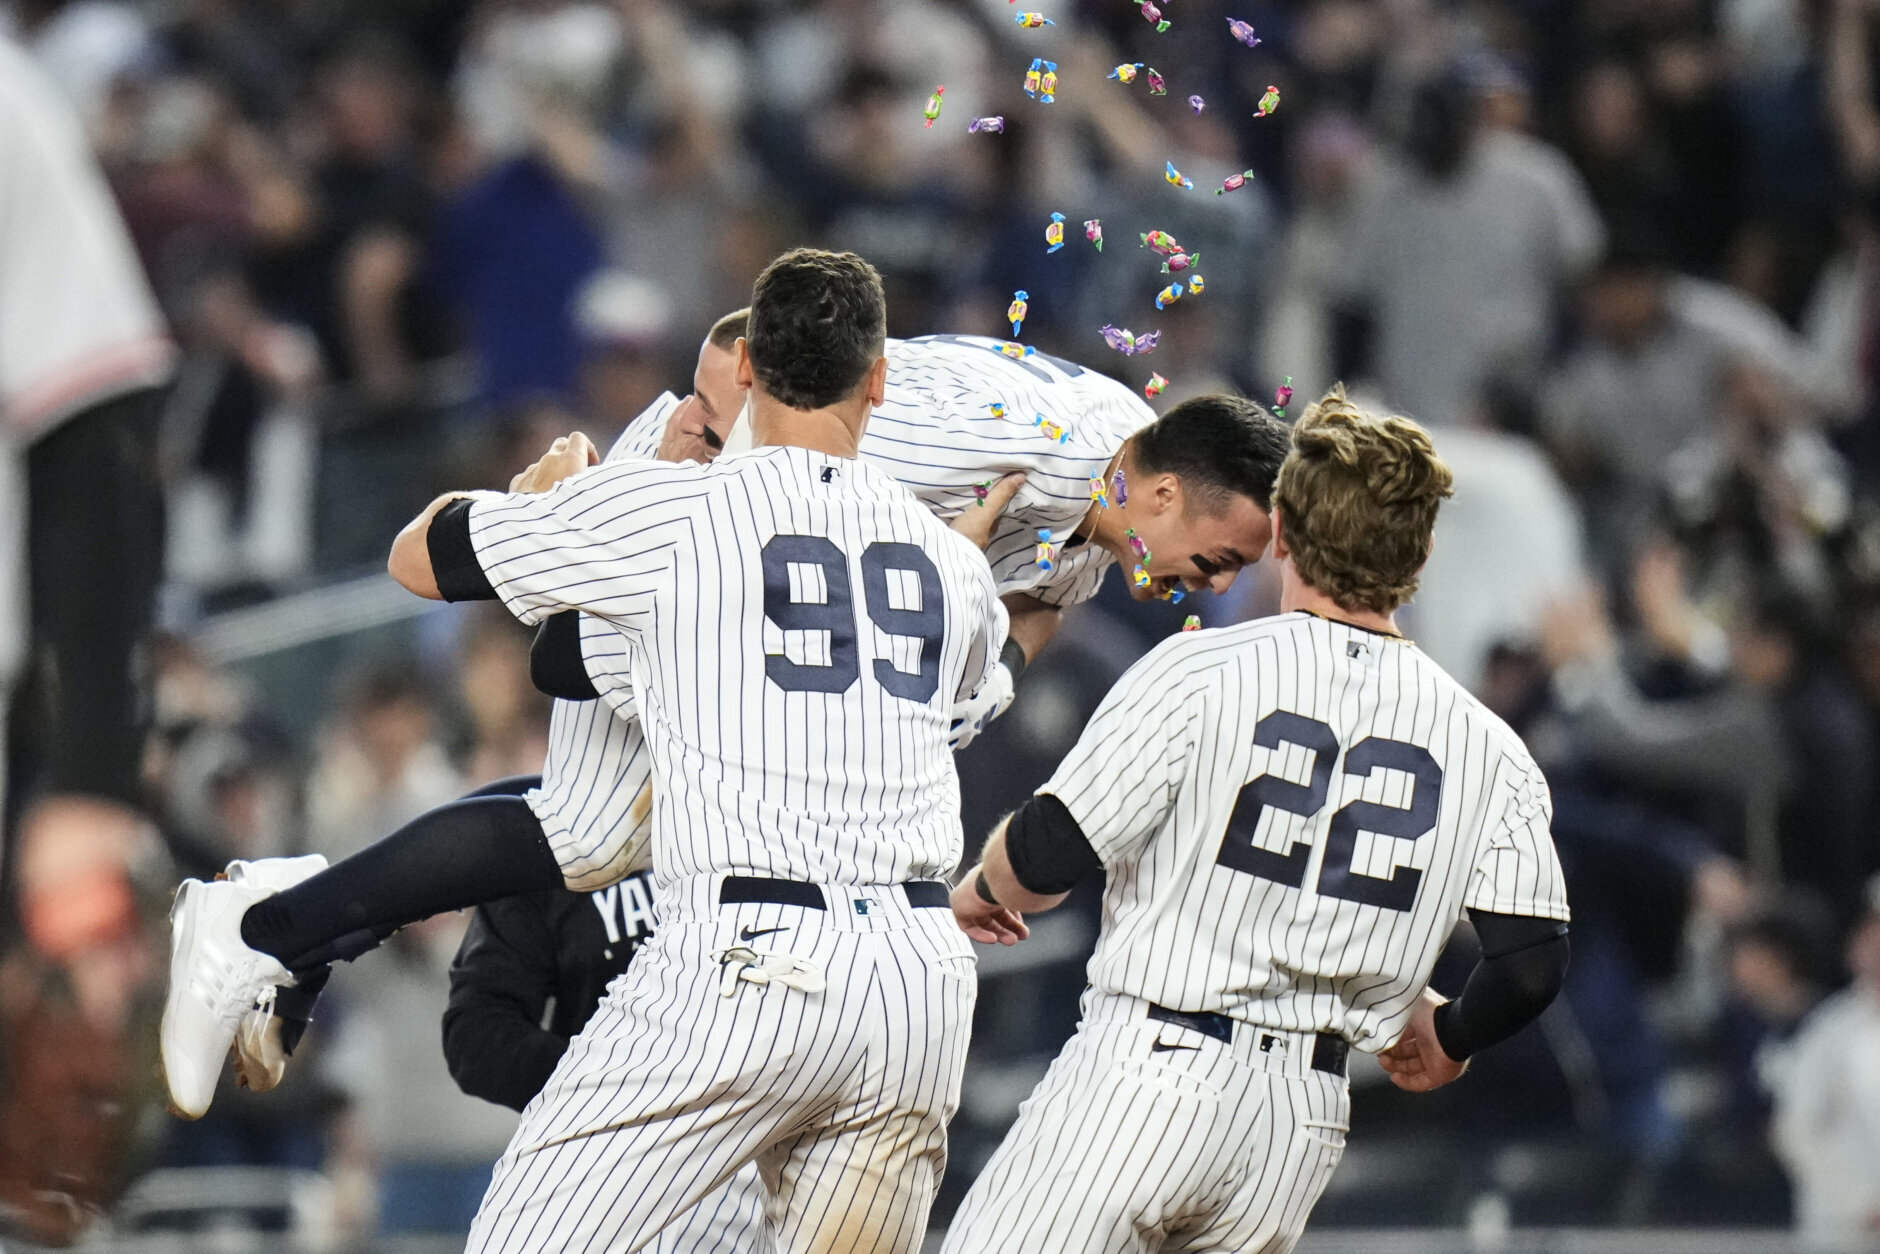 Yankees CRUISE to a Game 5 win